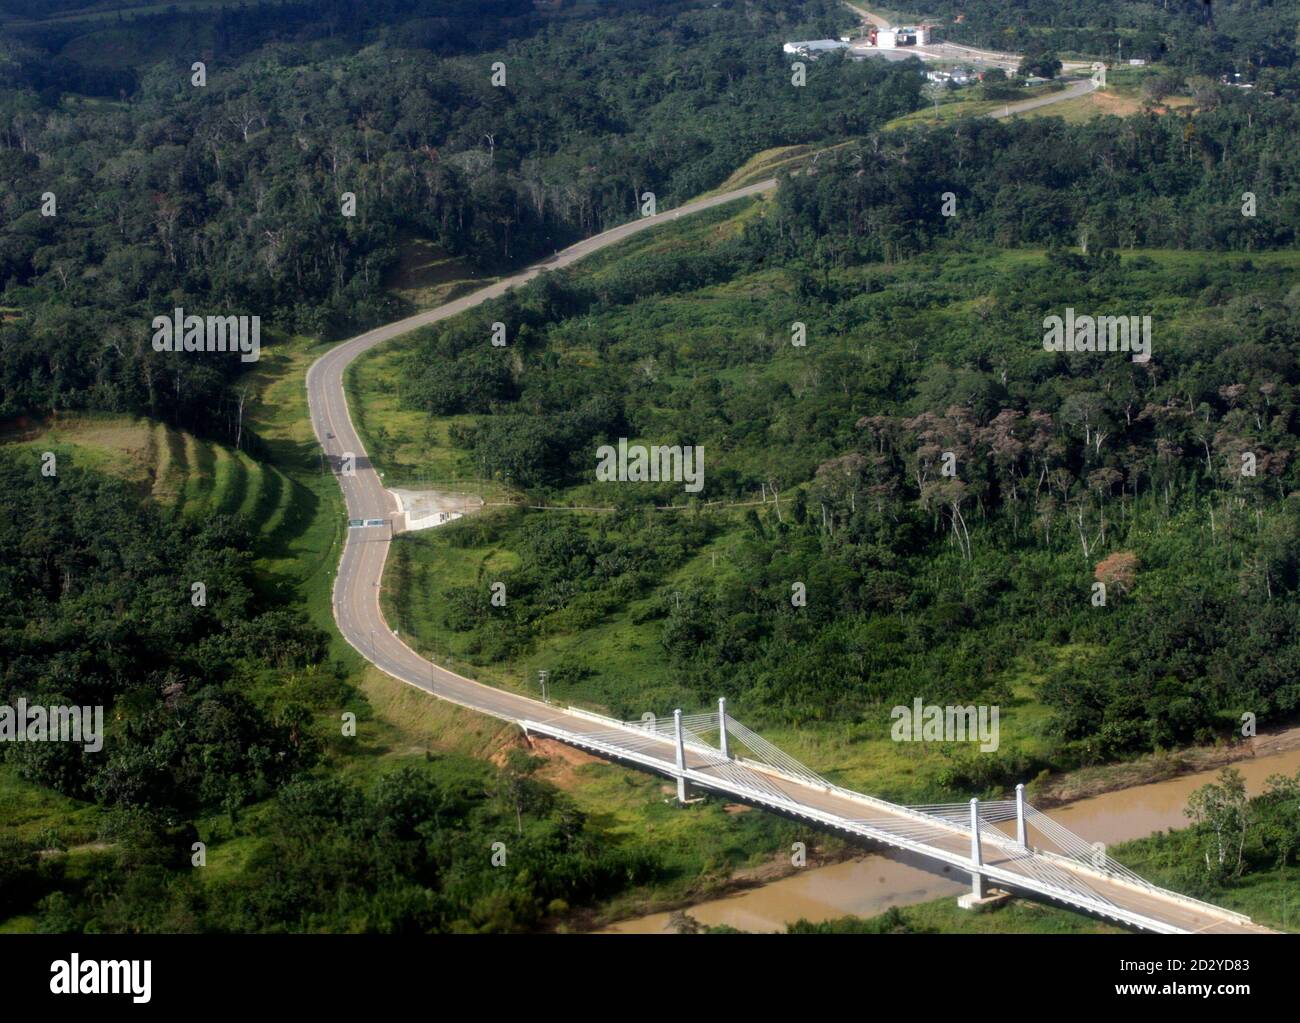 Highway Being Built High Resolution Stock Photography and Images - Alamy